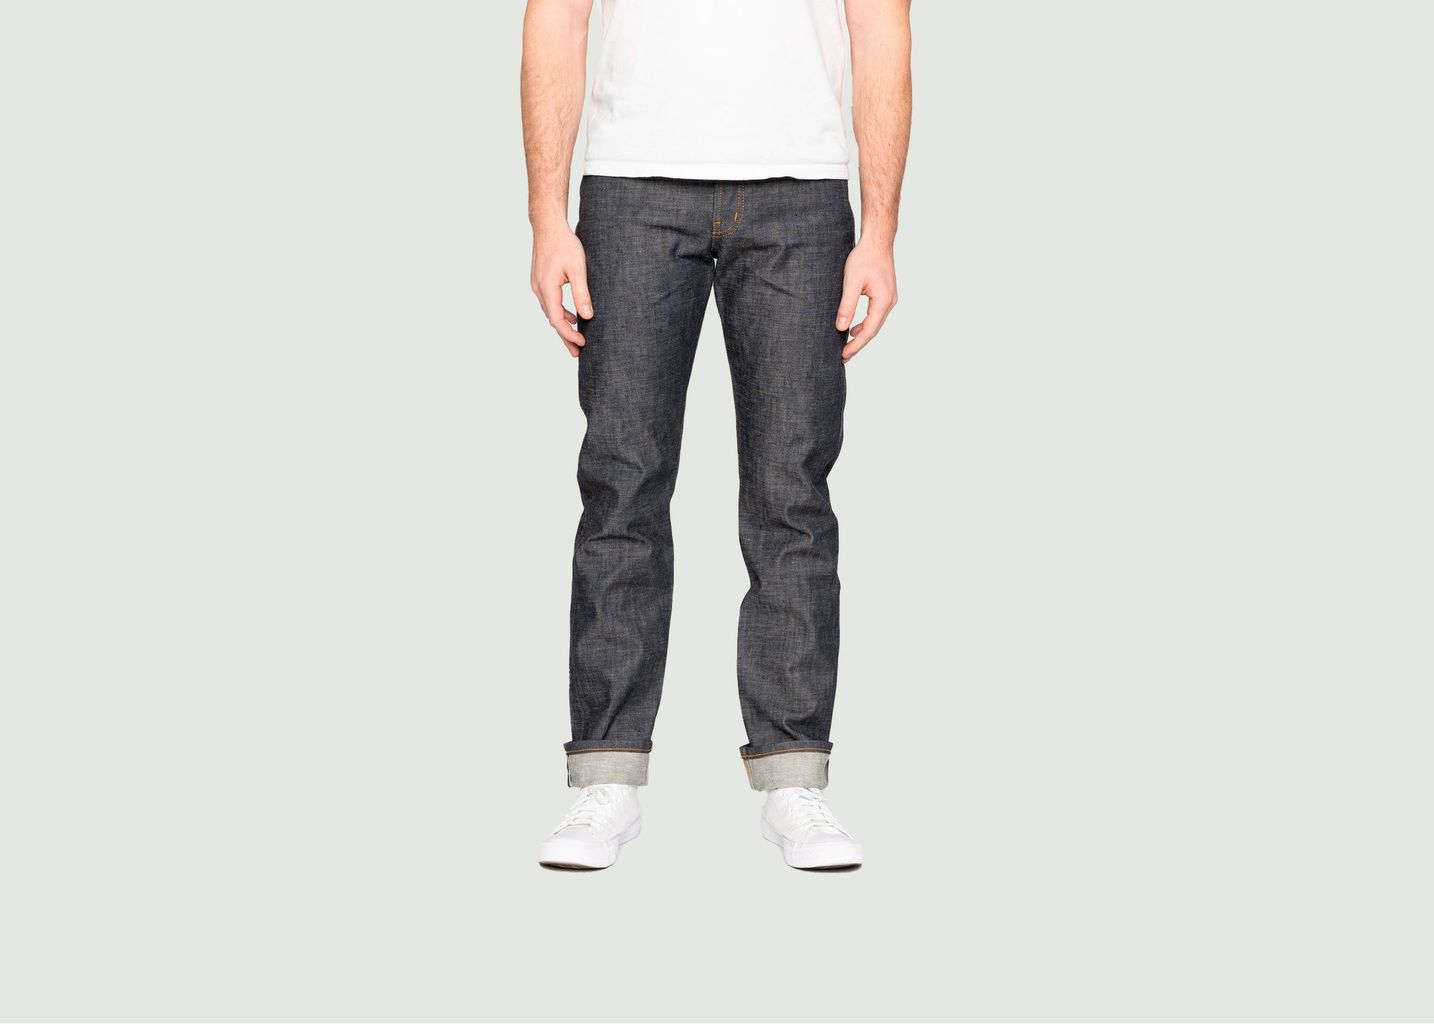 Naked & Famous Tried & True Selvedge True Guy Jeans